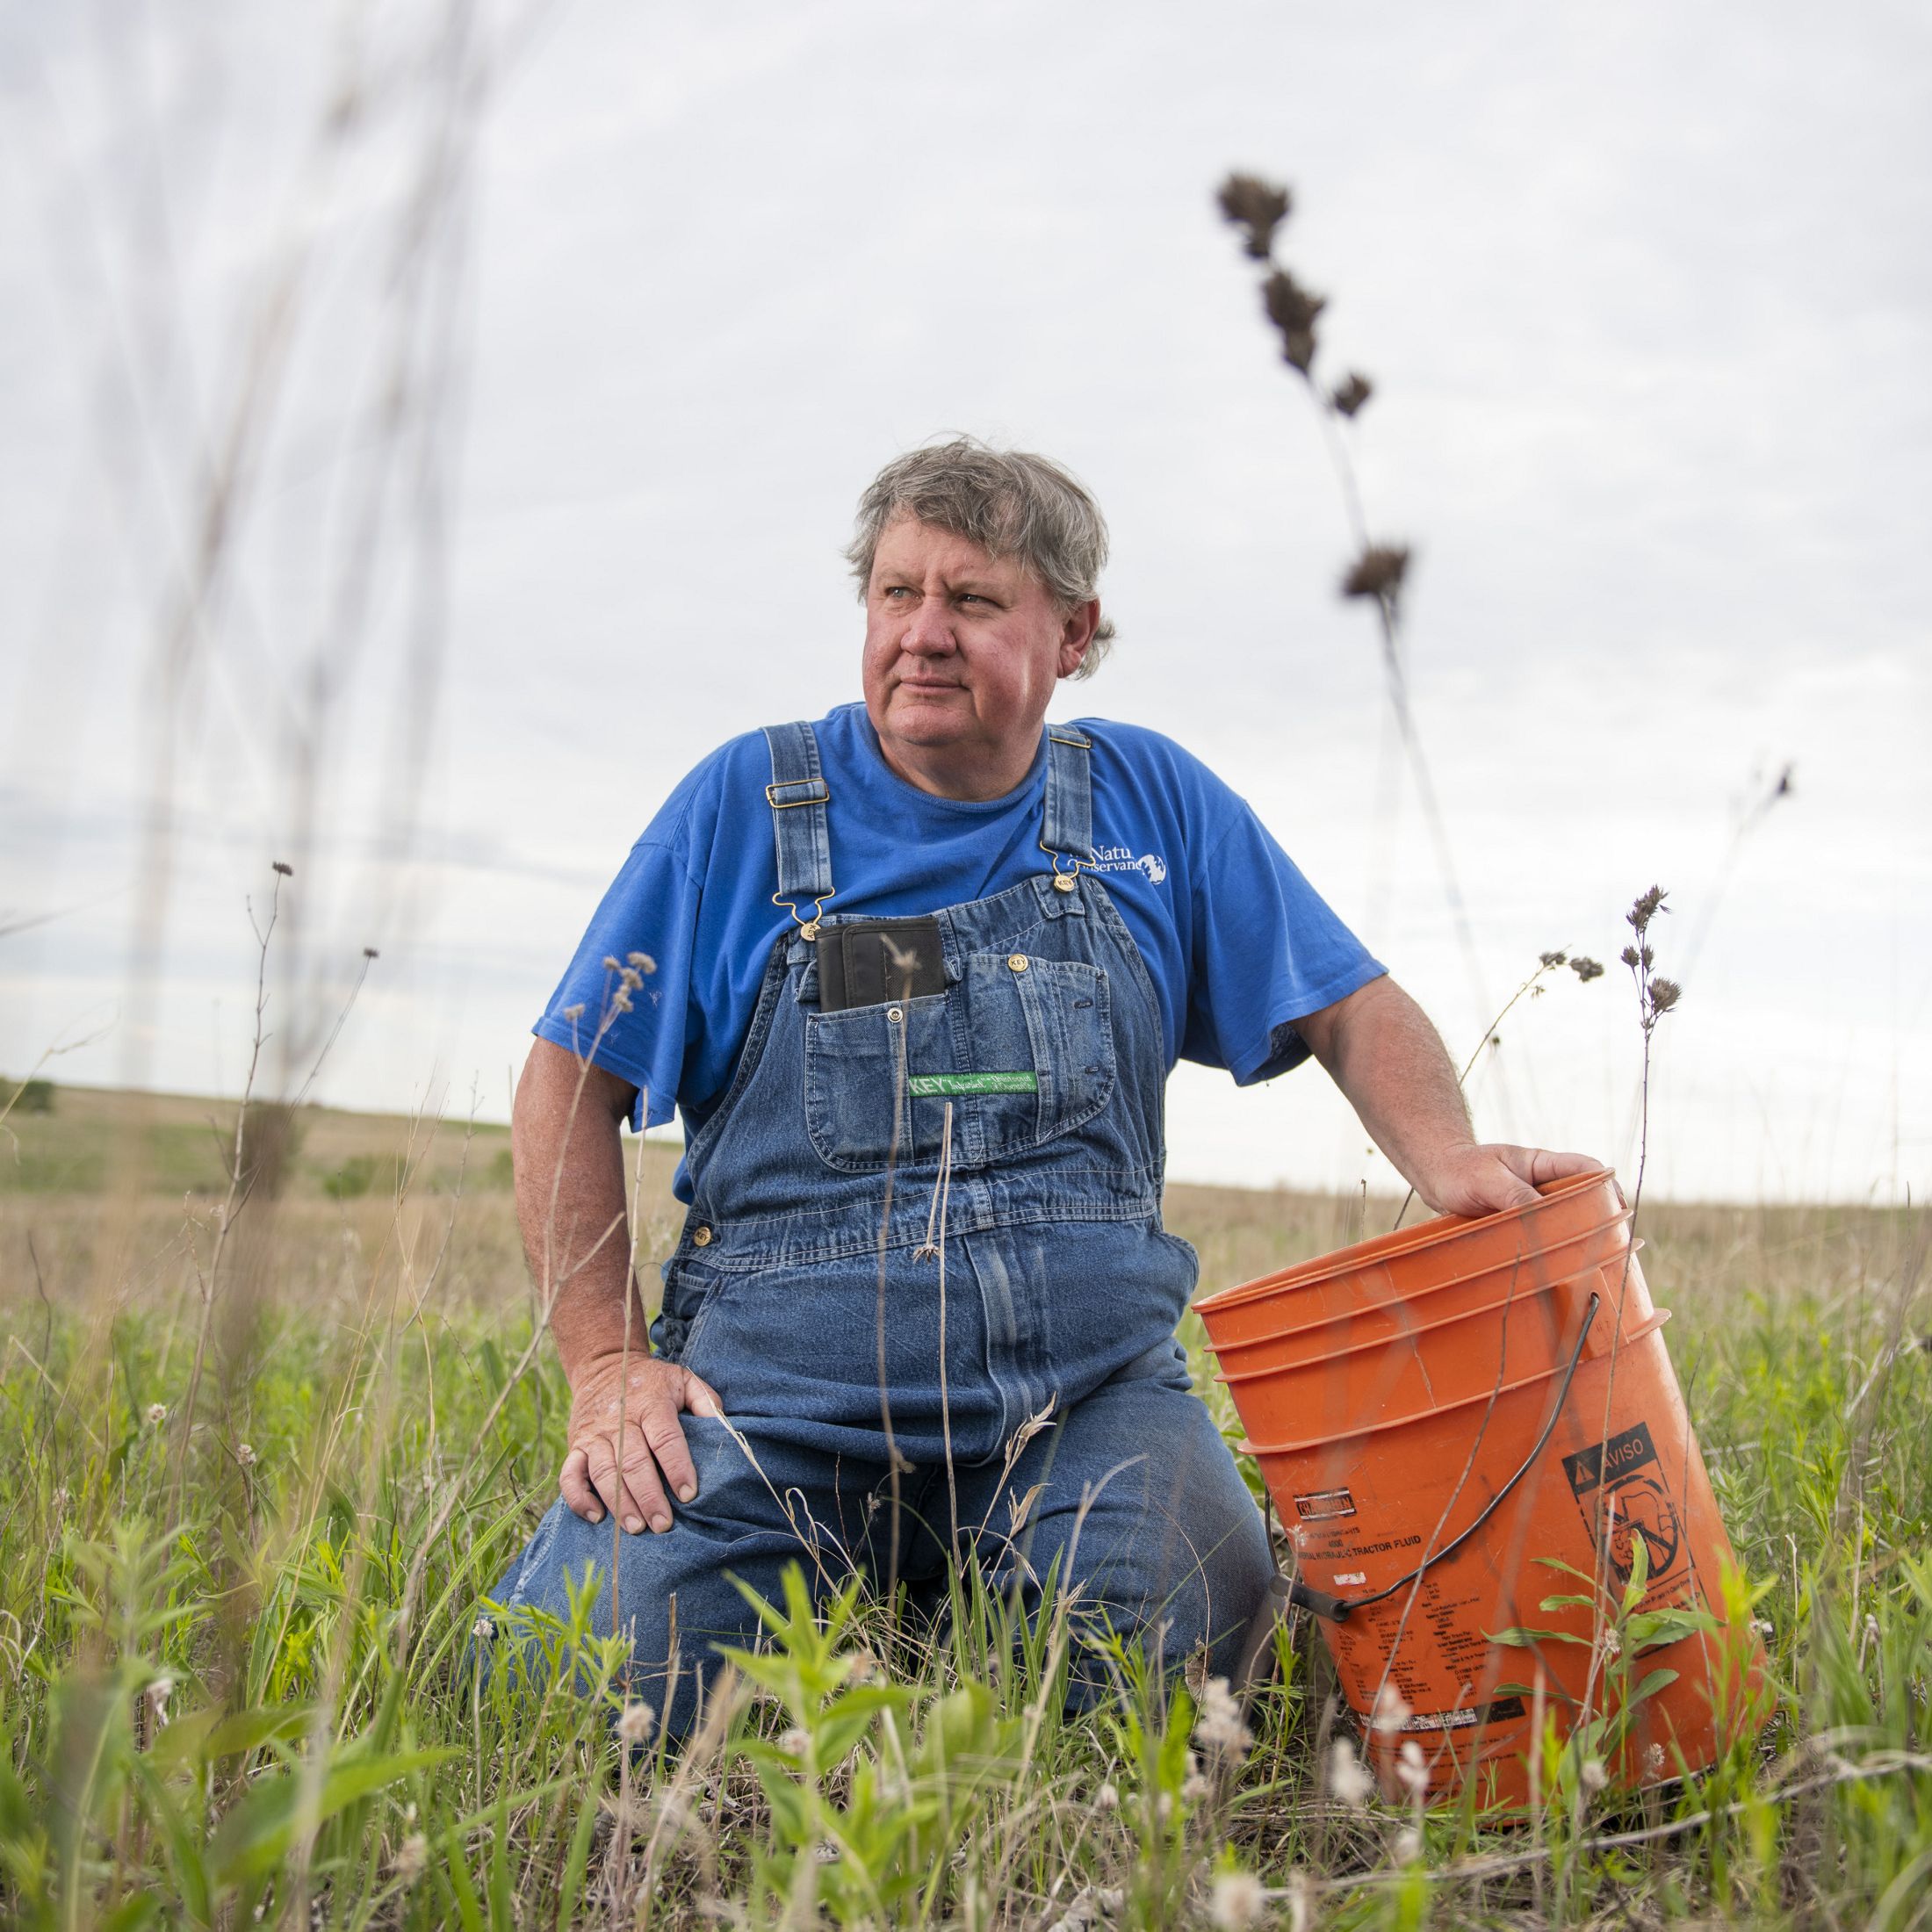 portrait of man in overalls sitting in a field with an orange utility bucket